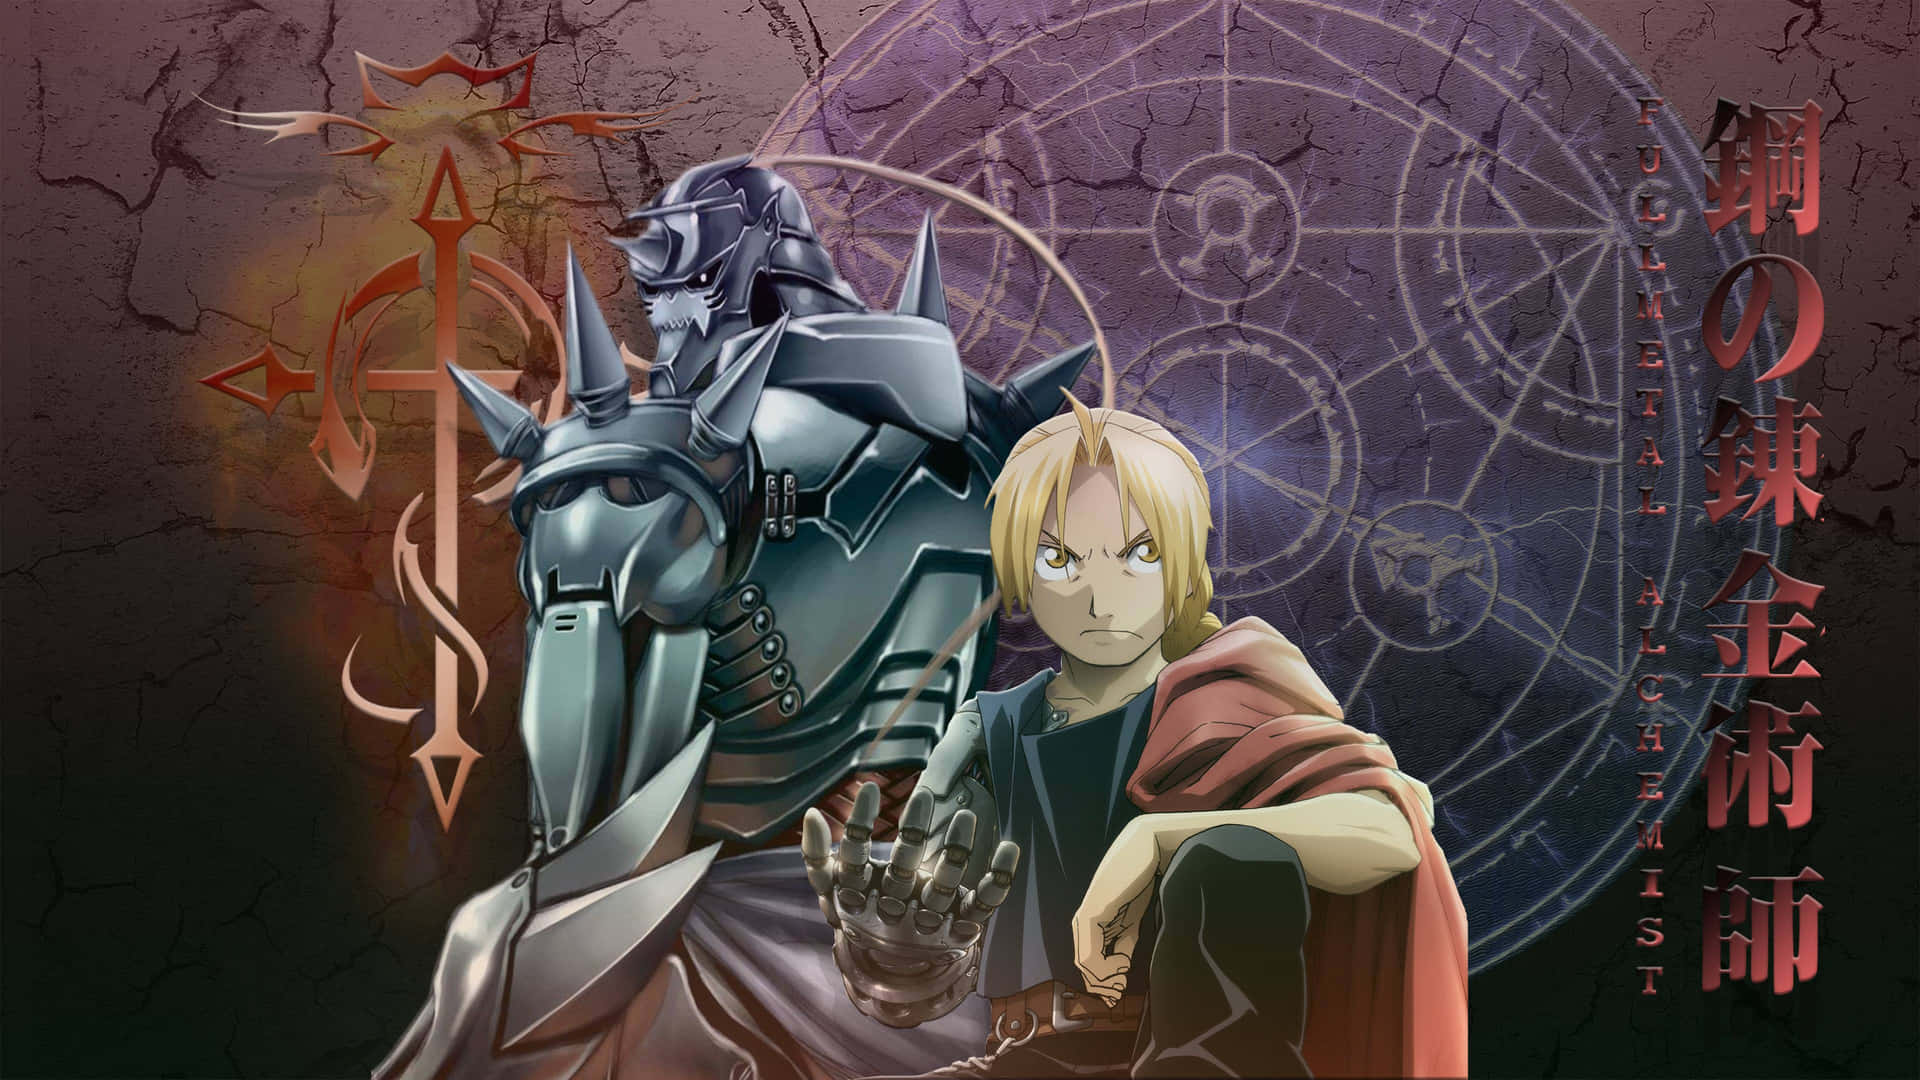 A Determined Edward Elric In Battle-ready Stance Background